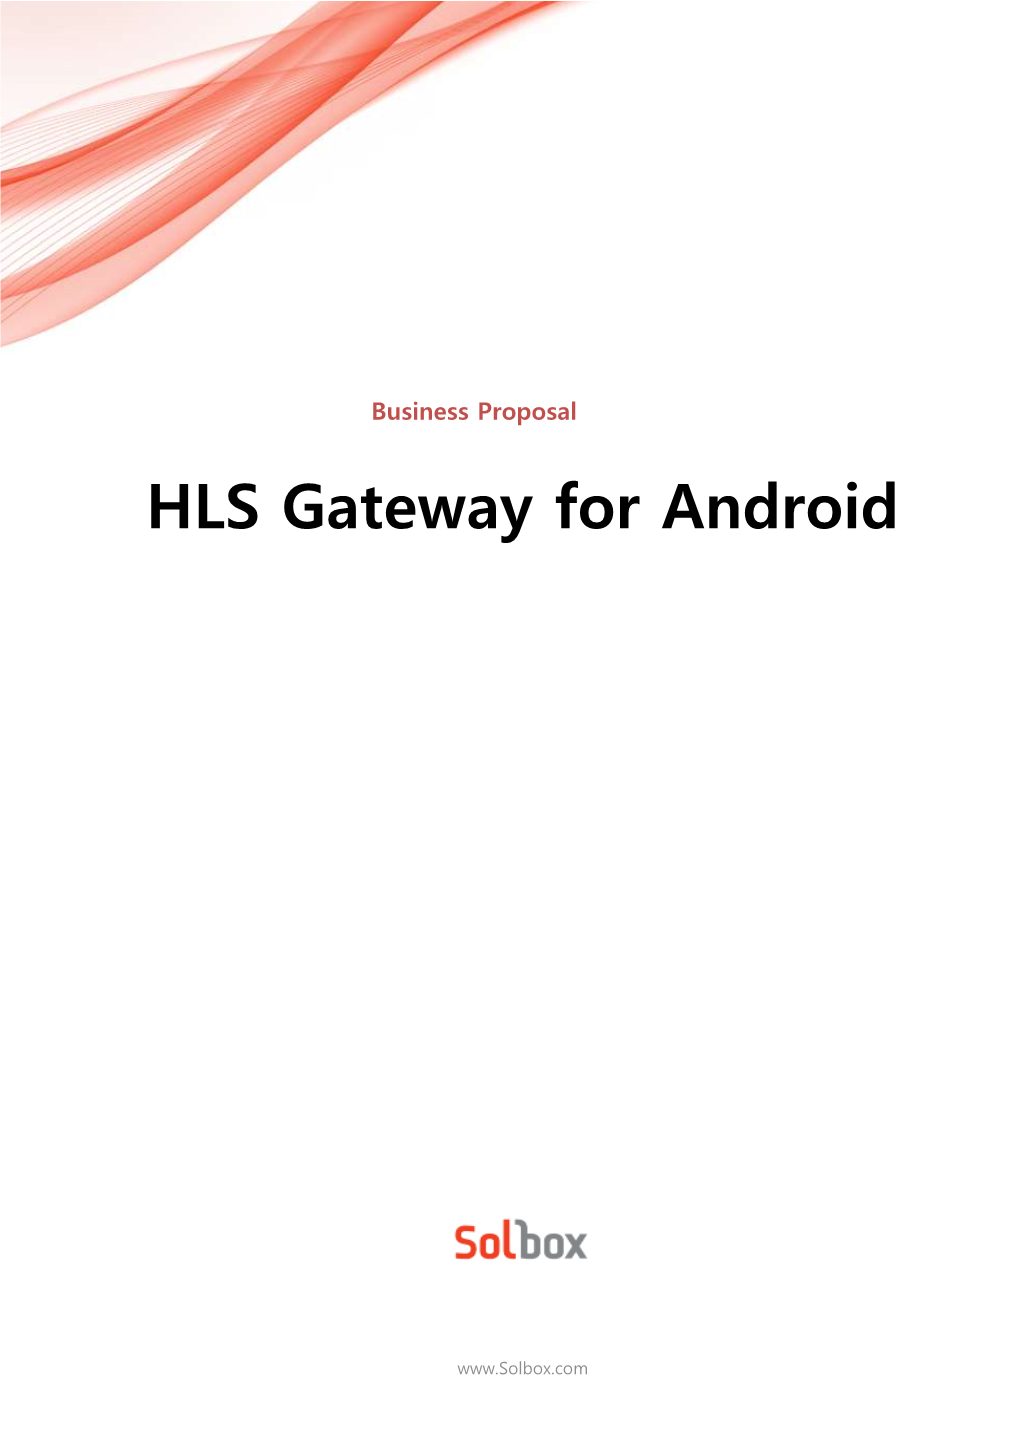 HLS Gateway for Android